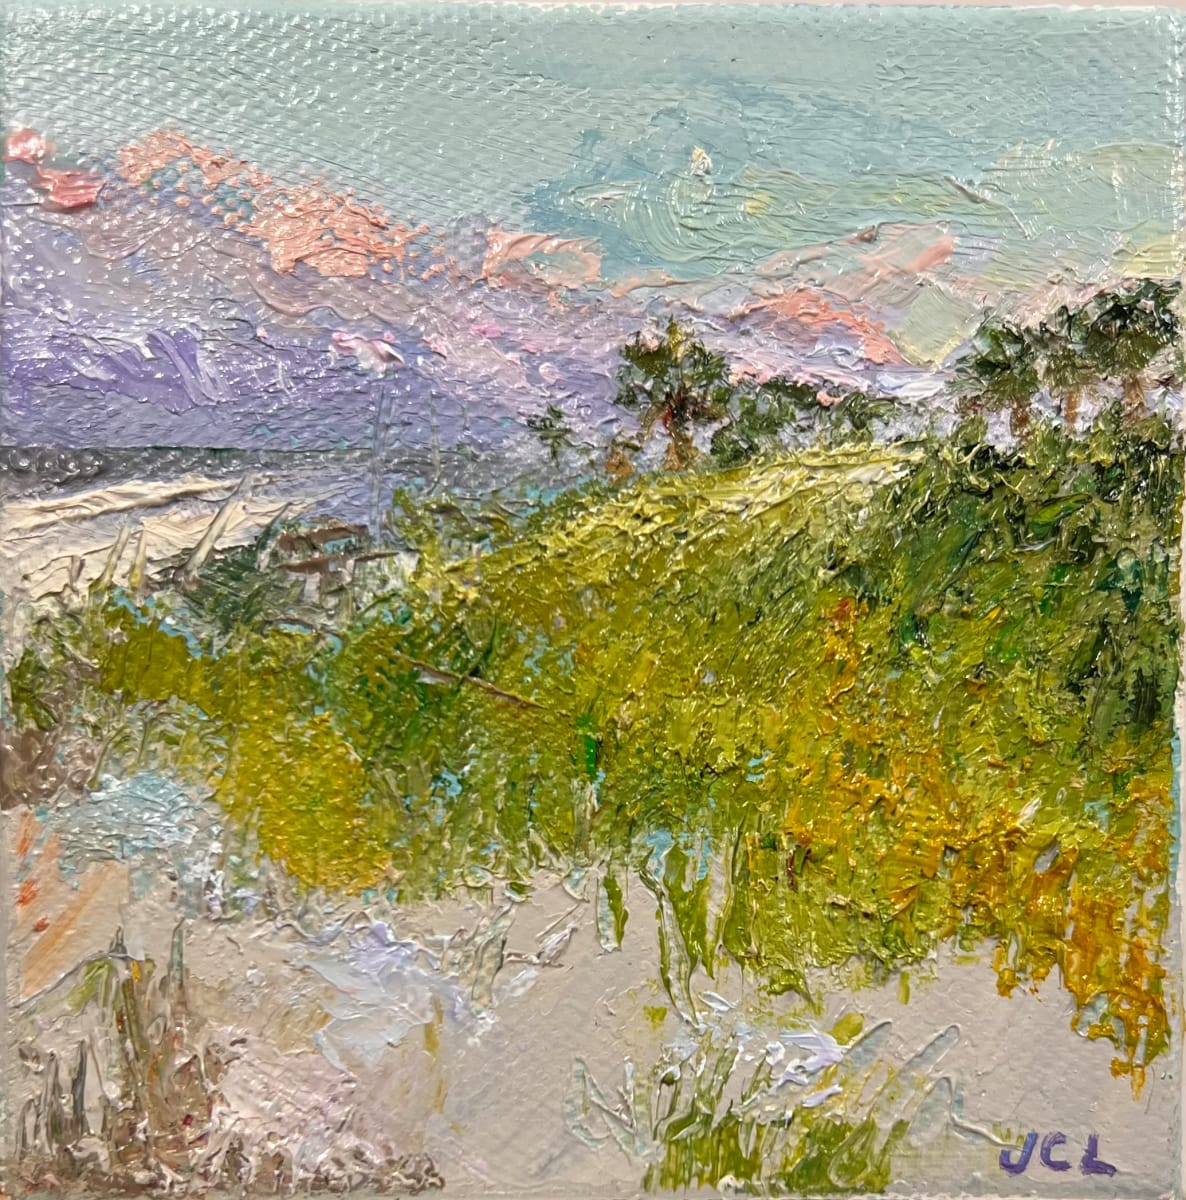 A Beach Day In May by Julia Chandler Lawing  Image: Early evening skies over the dunes and sea